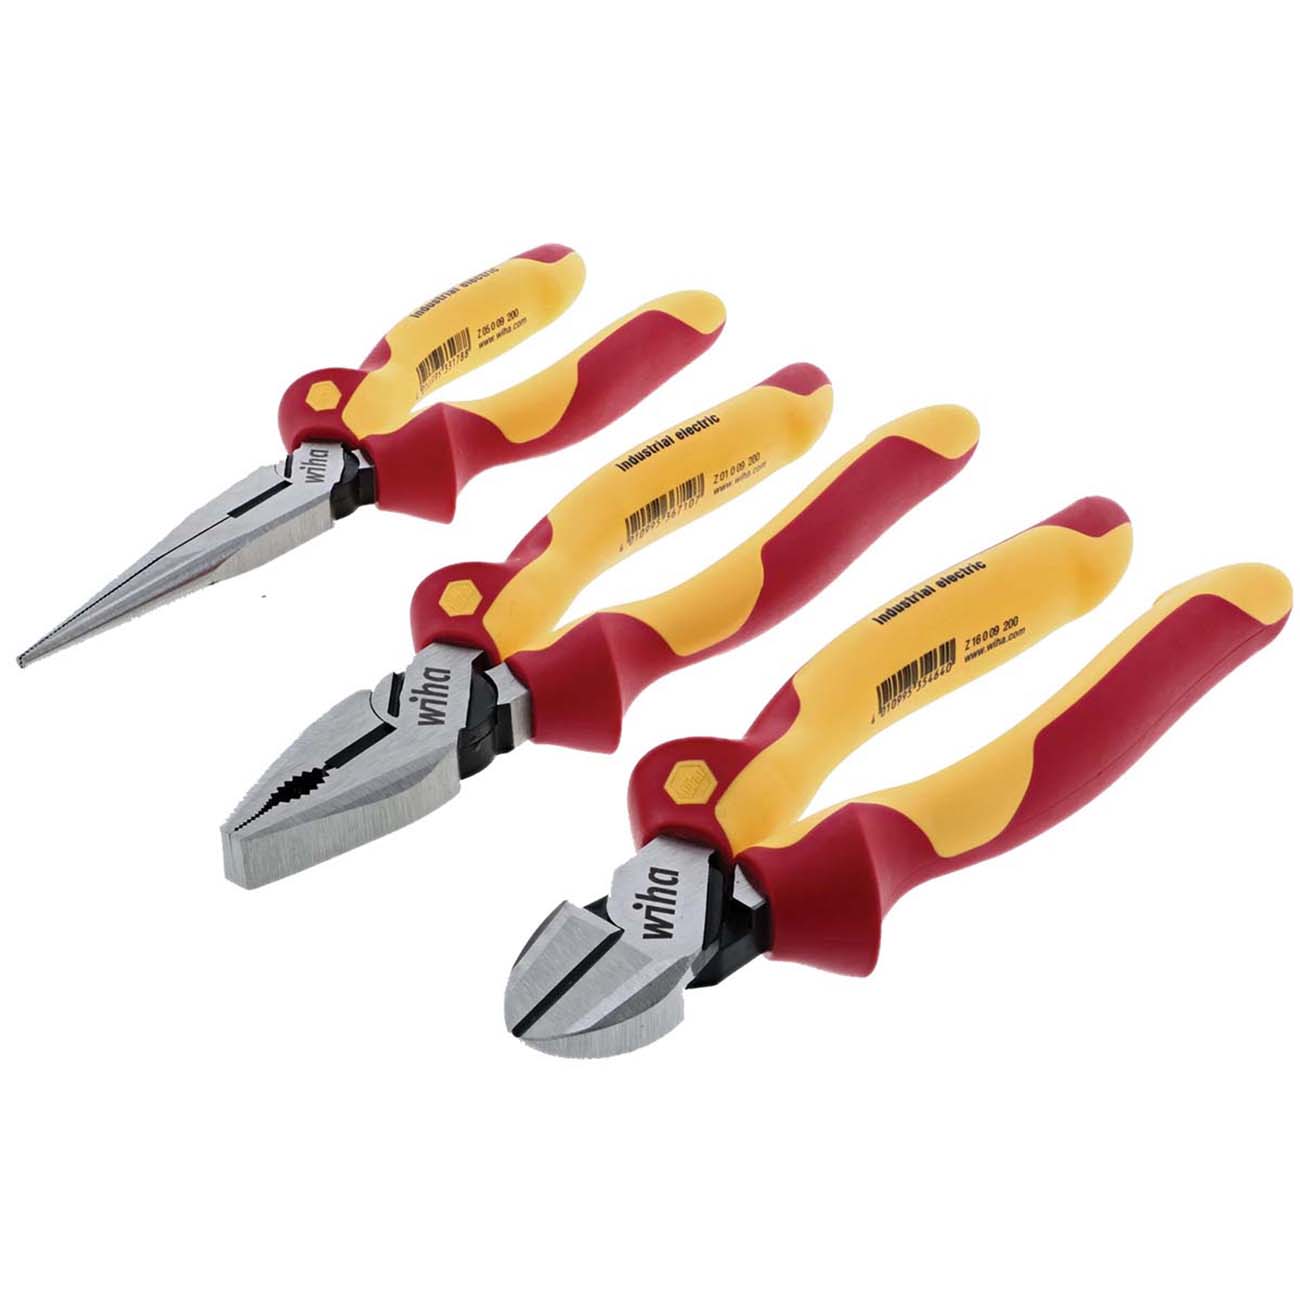 Wiha Insulated Industrial Pliers-cutters Set - 3 Piece Set